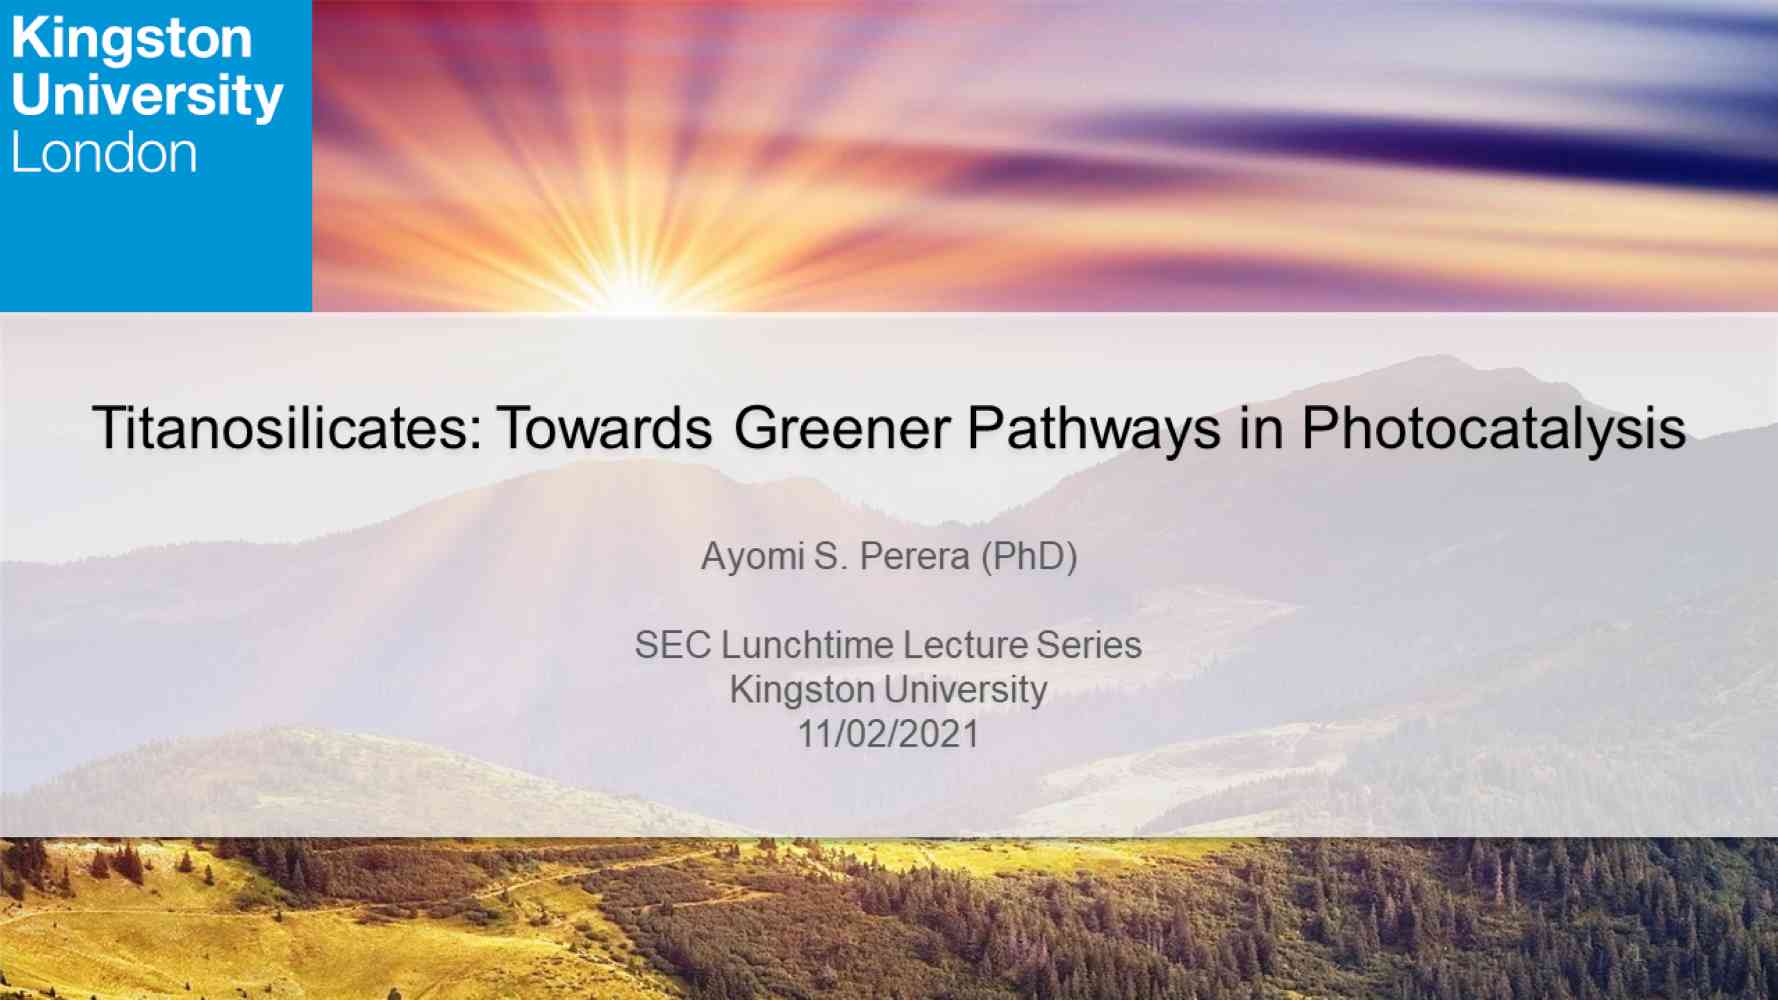 SEC Lunchtime lecture series 11/02/2021 presented by Dr Perera - Title: Titanosilicates: Towards Greener Pathways in Photocatalysis